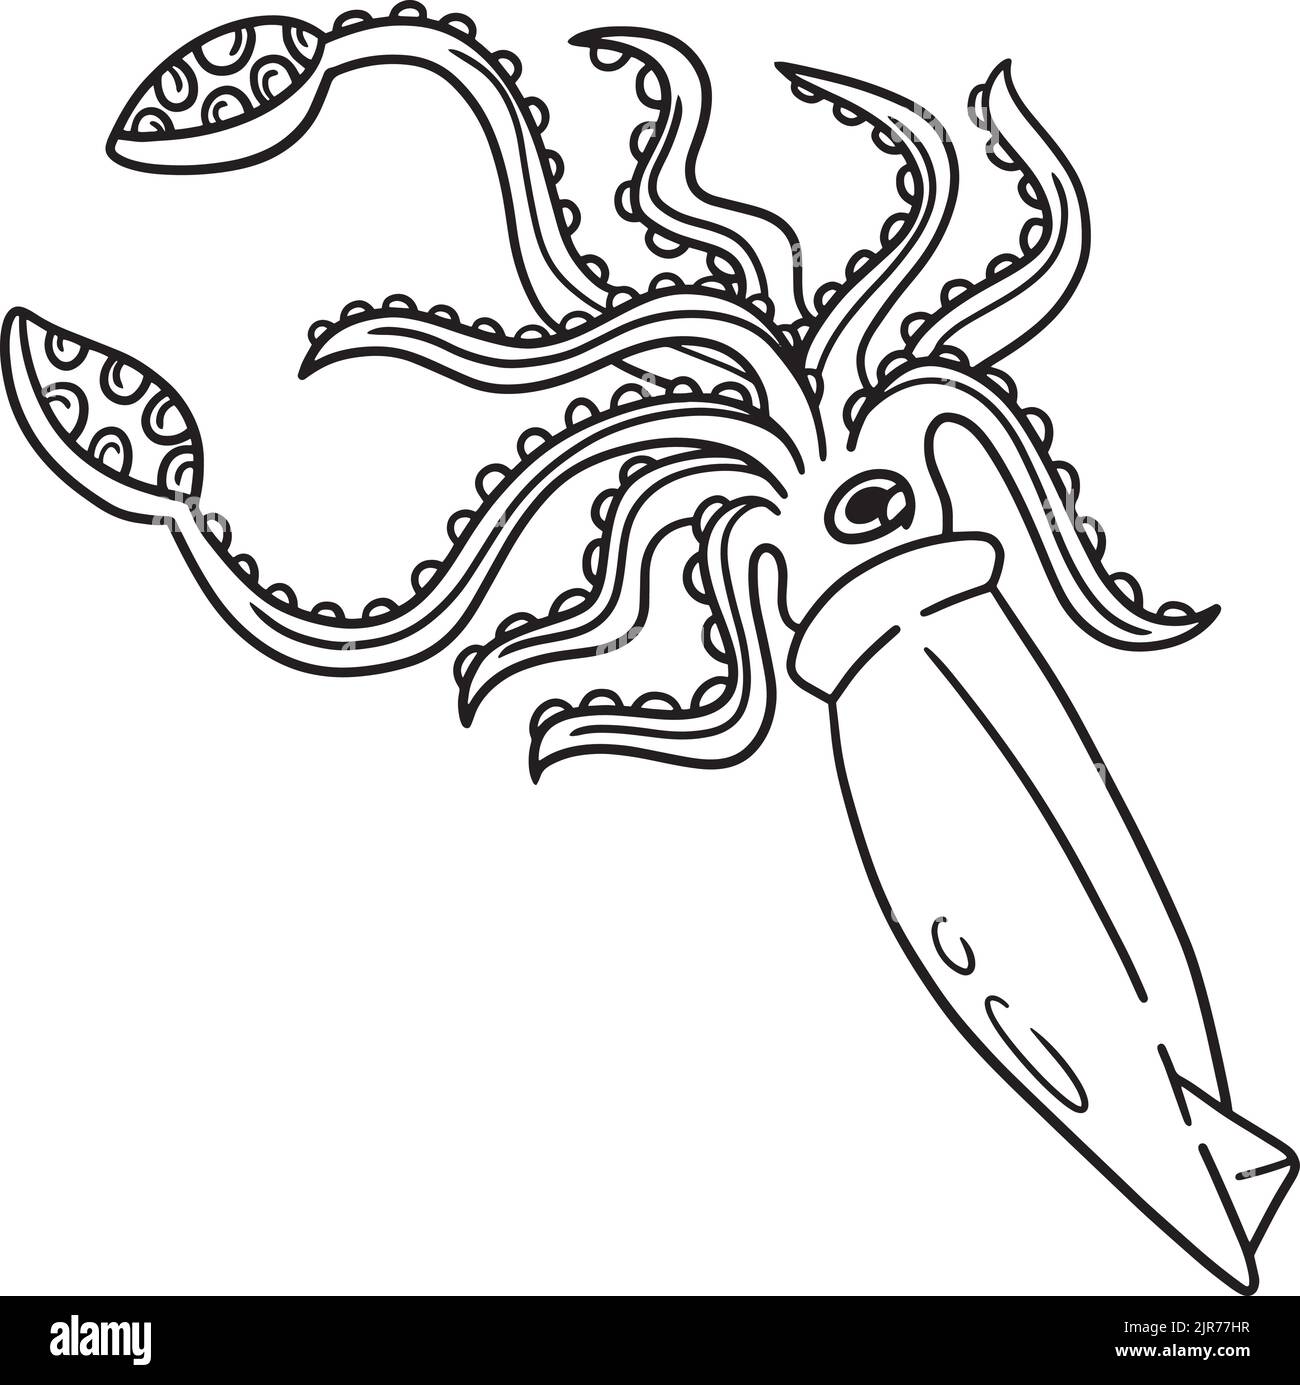 Giant Squid Coloring Page for Kids Stock Vector